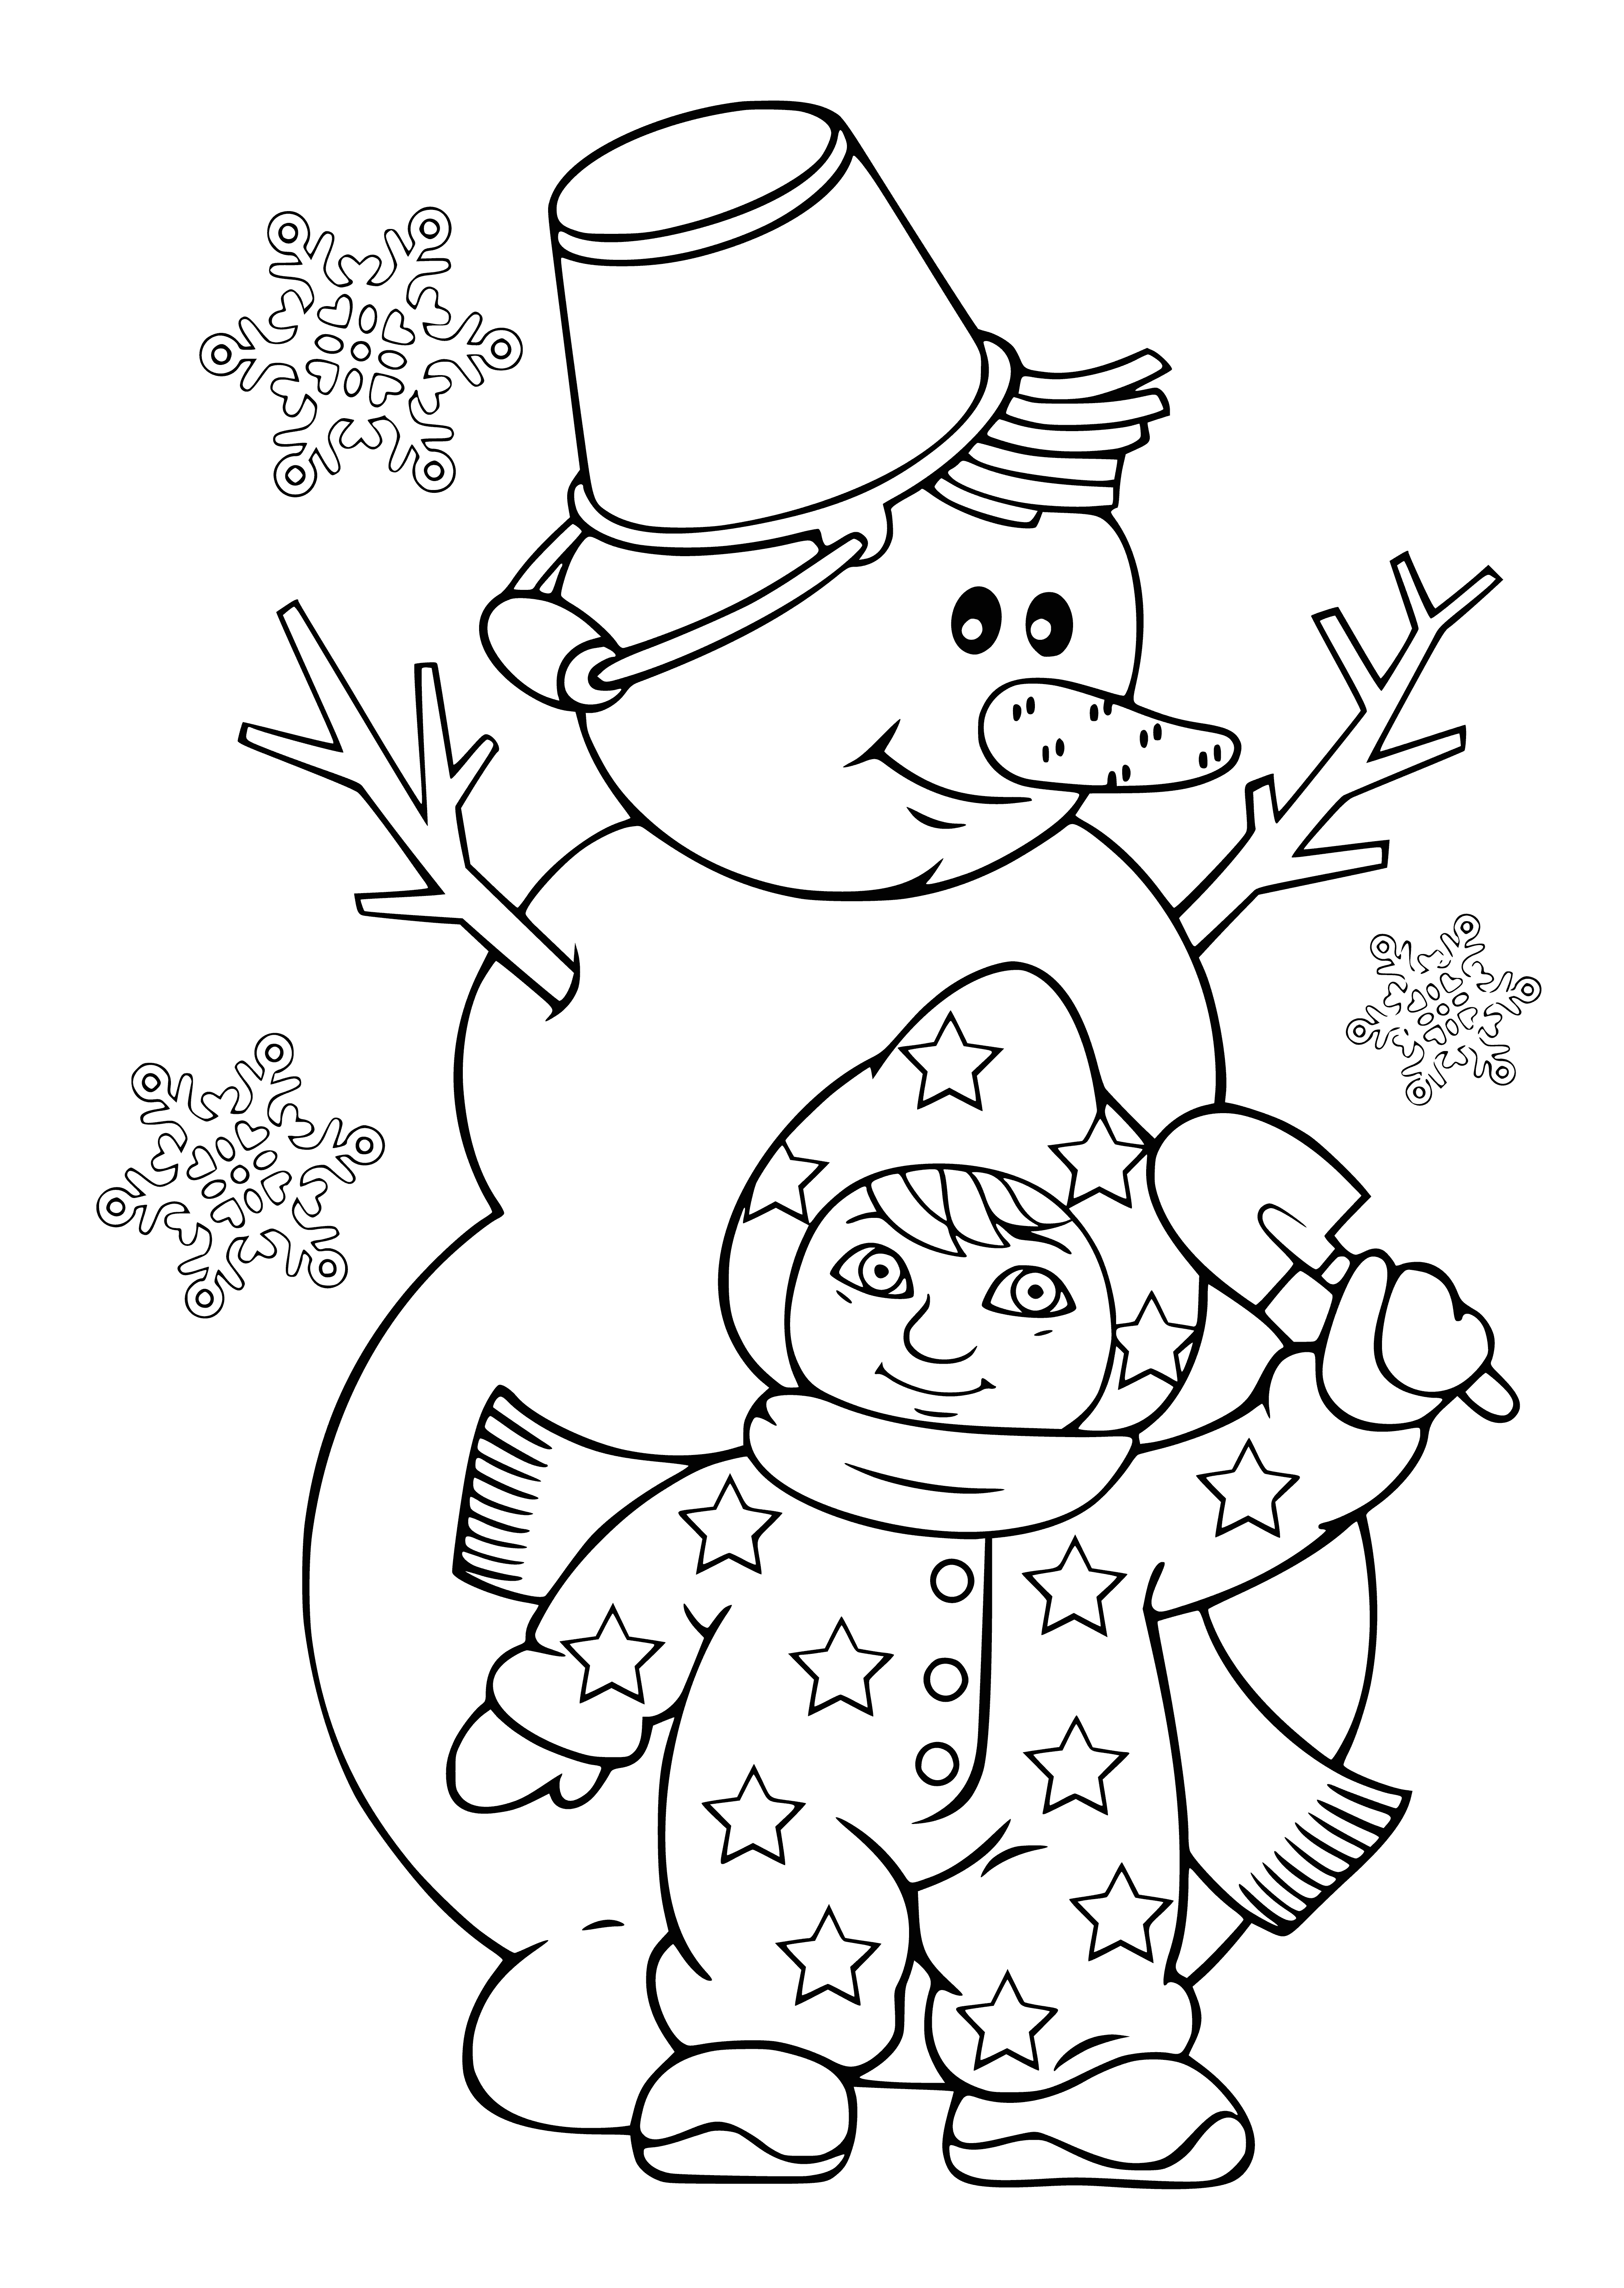 coloring page: Kid sculpts snowman, rolling two big snowballs and one small, having lots of fun. #snow #snowman #fun